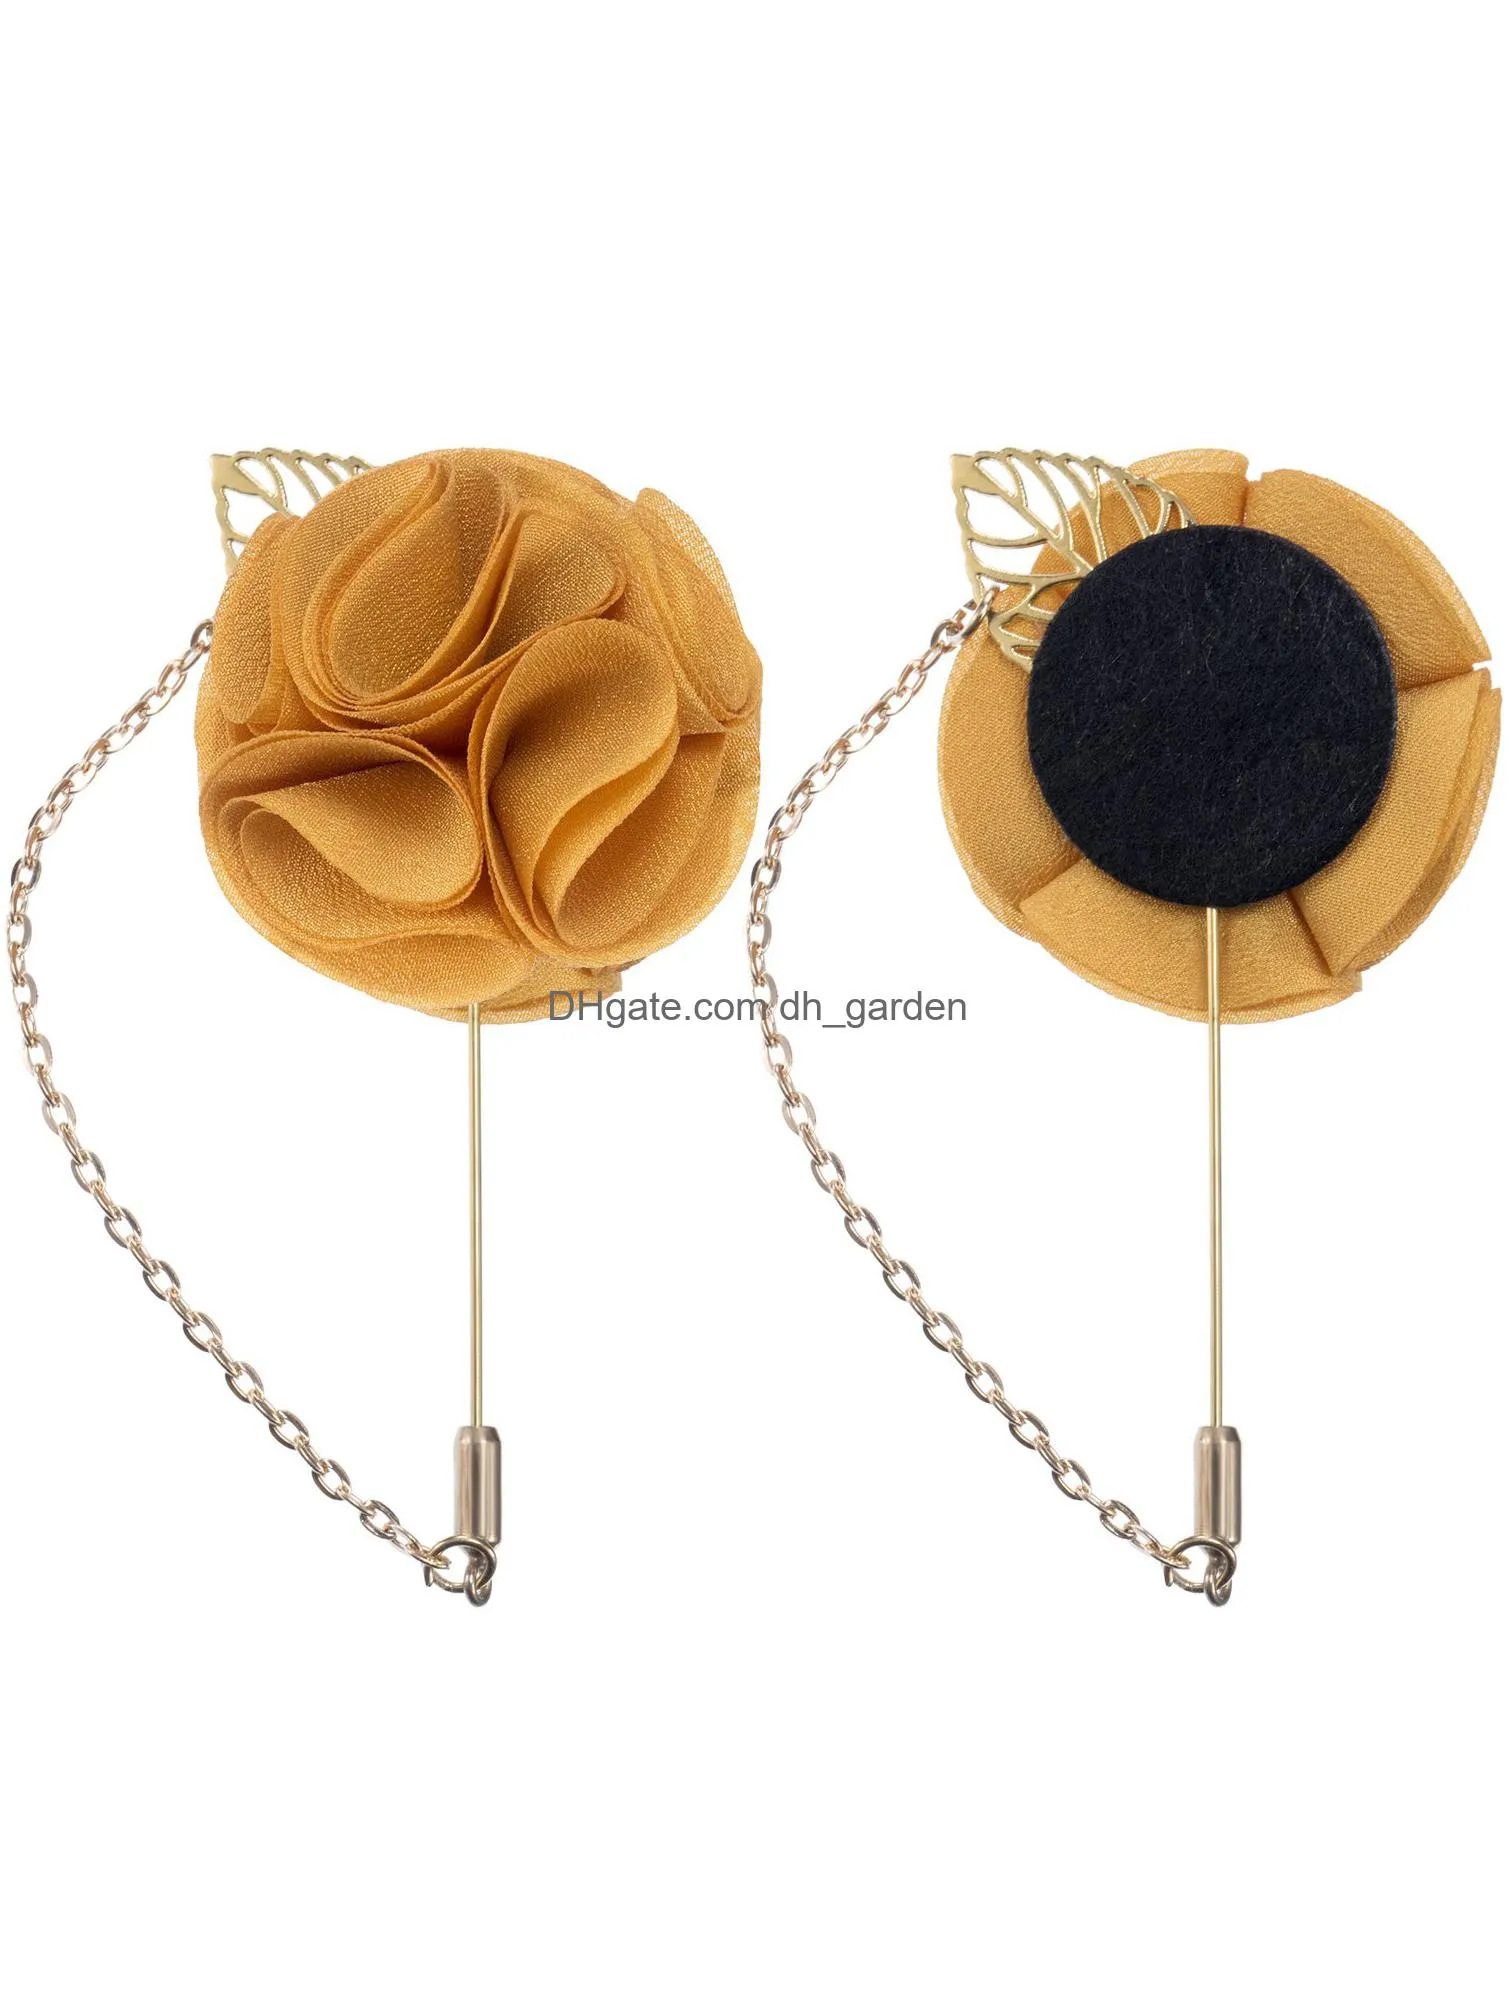 shappy mens satin lapel pins with metal chain handmade boutonniere pins with metal chain and storage box 15 colors